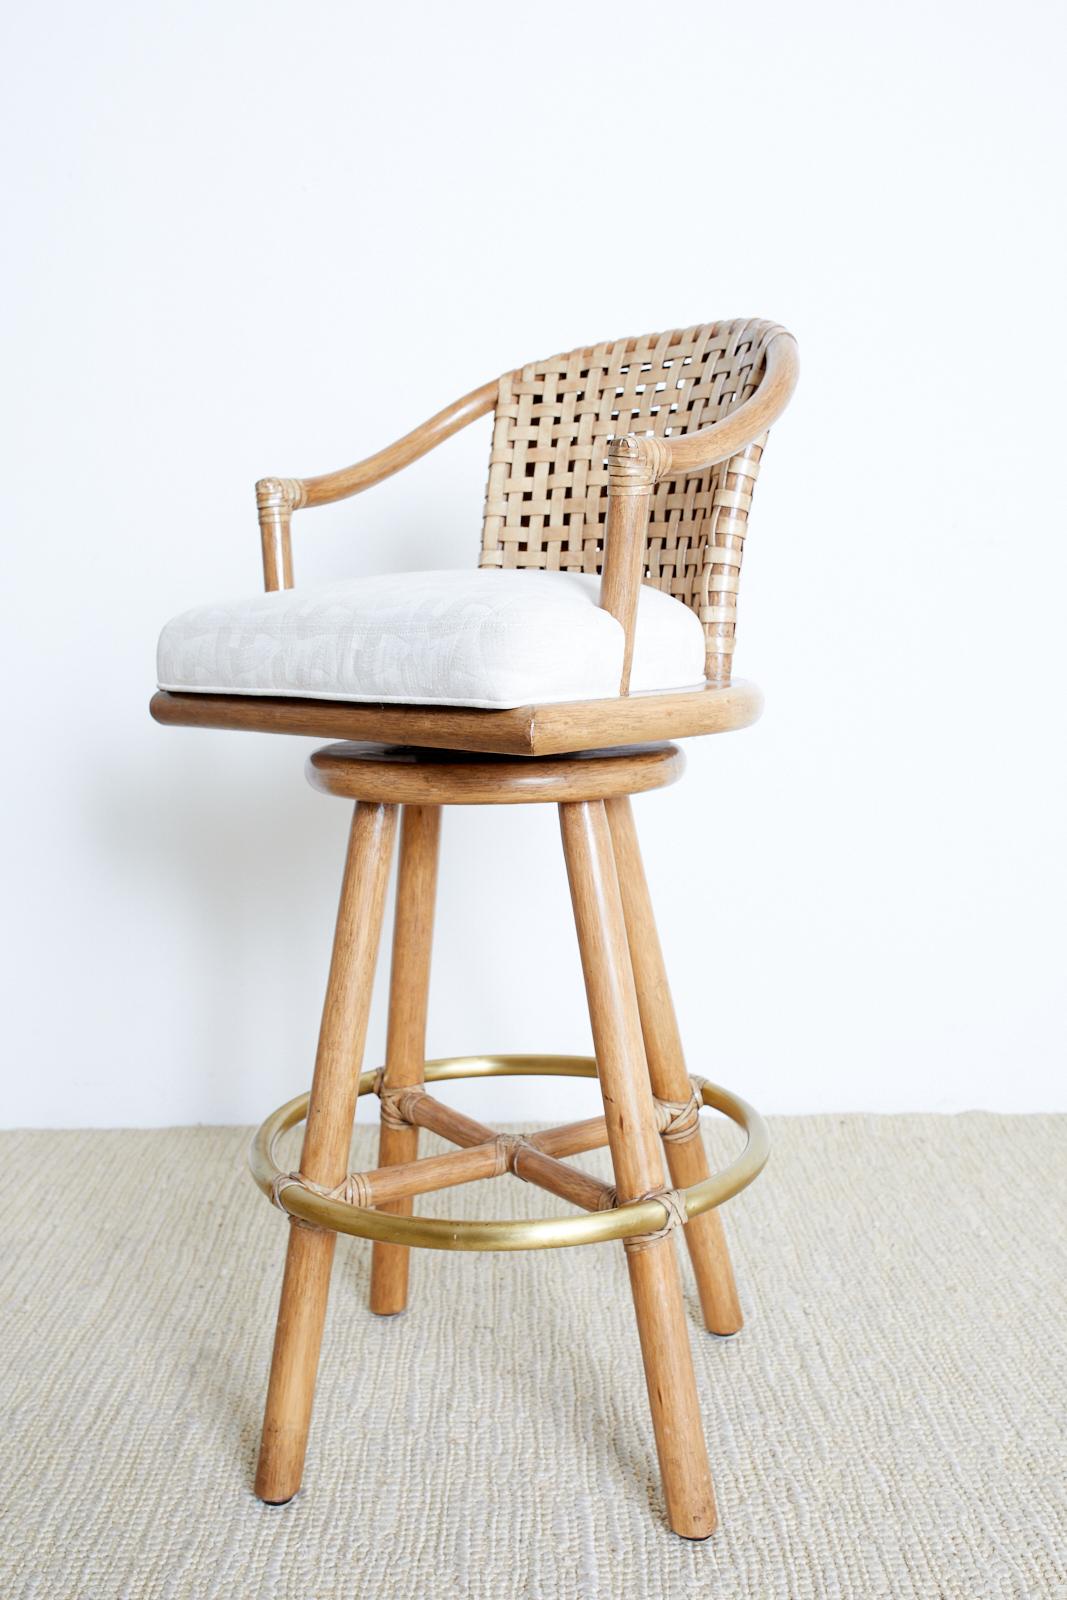 California Modern style pair of swivel barstools by McGuire. Features a bamboo rattan frame and a woven leather backrest. The chairs are reinforced at the joints with leather rawhide laces and have round straight legs conjoined by a brass ring